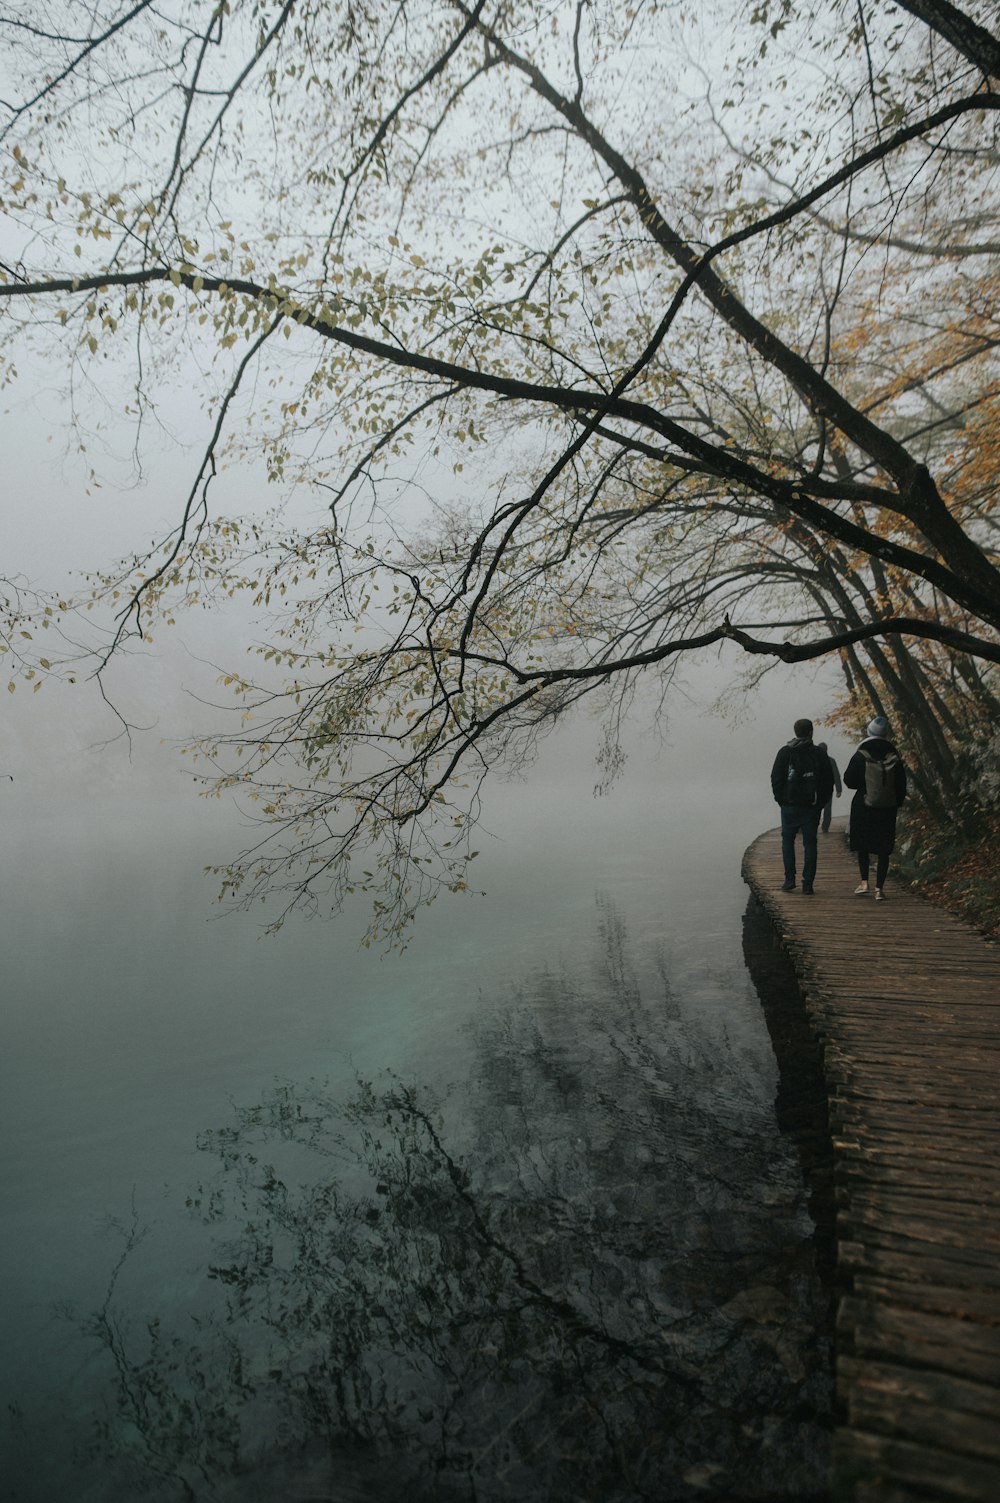 two people walking on a path by a body of water